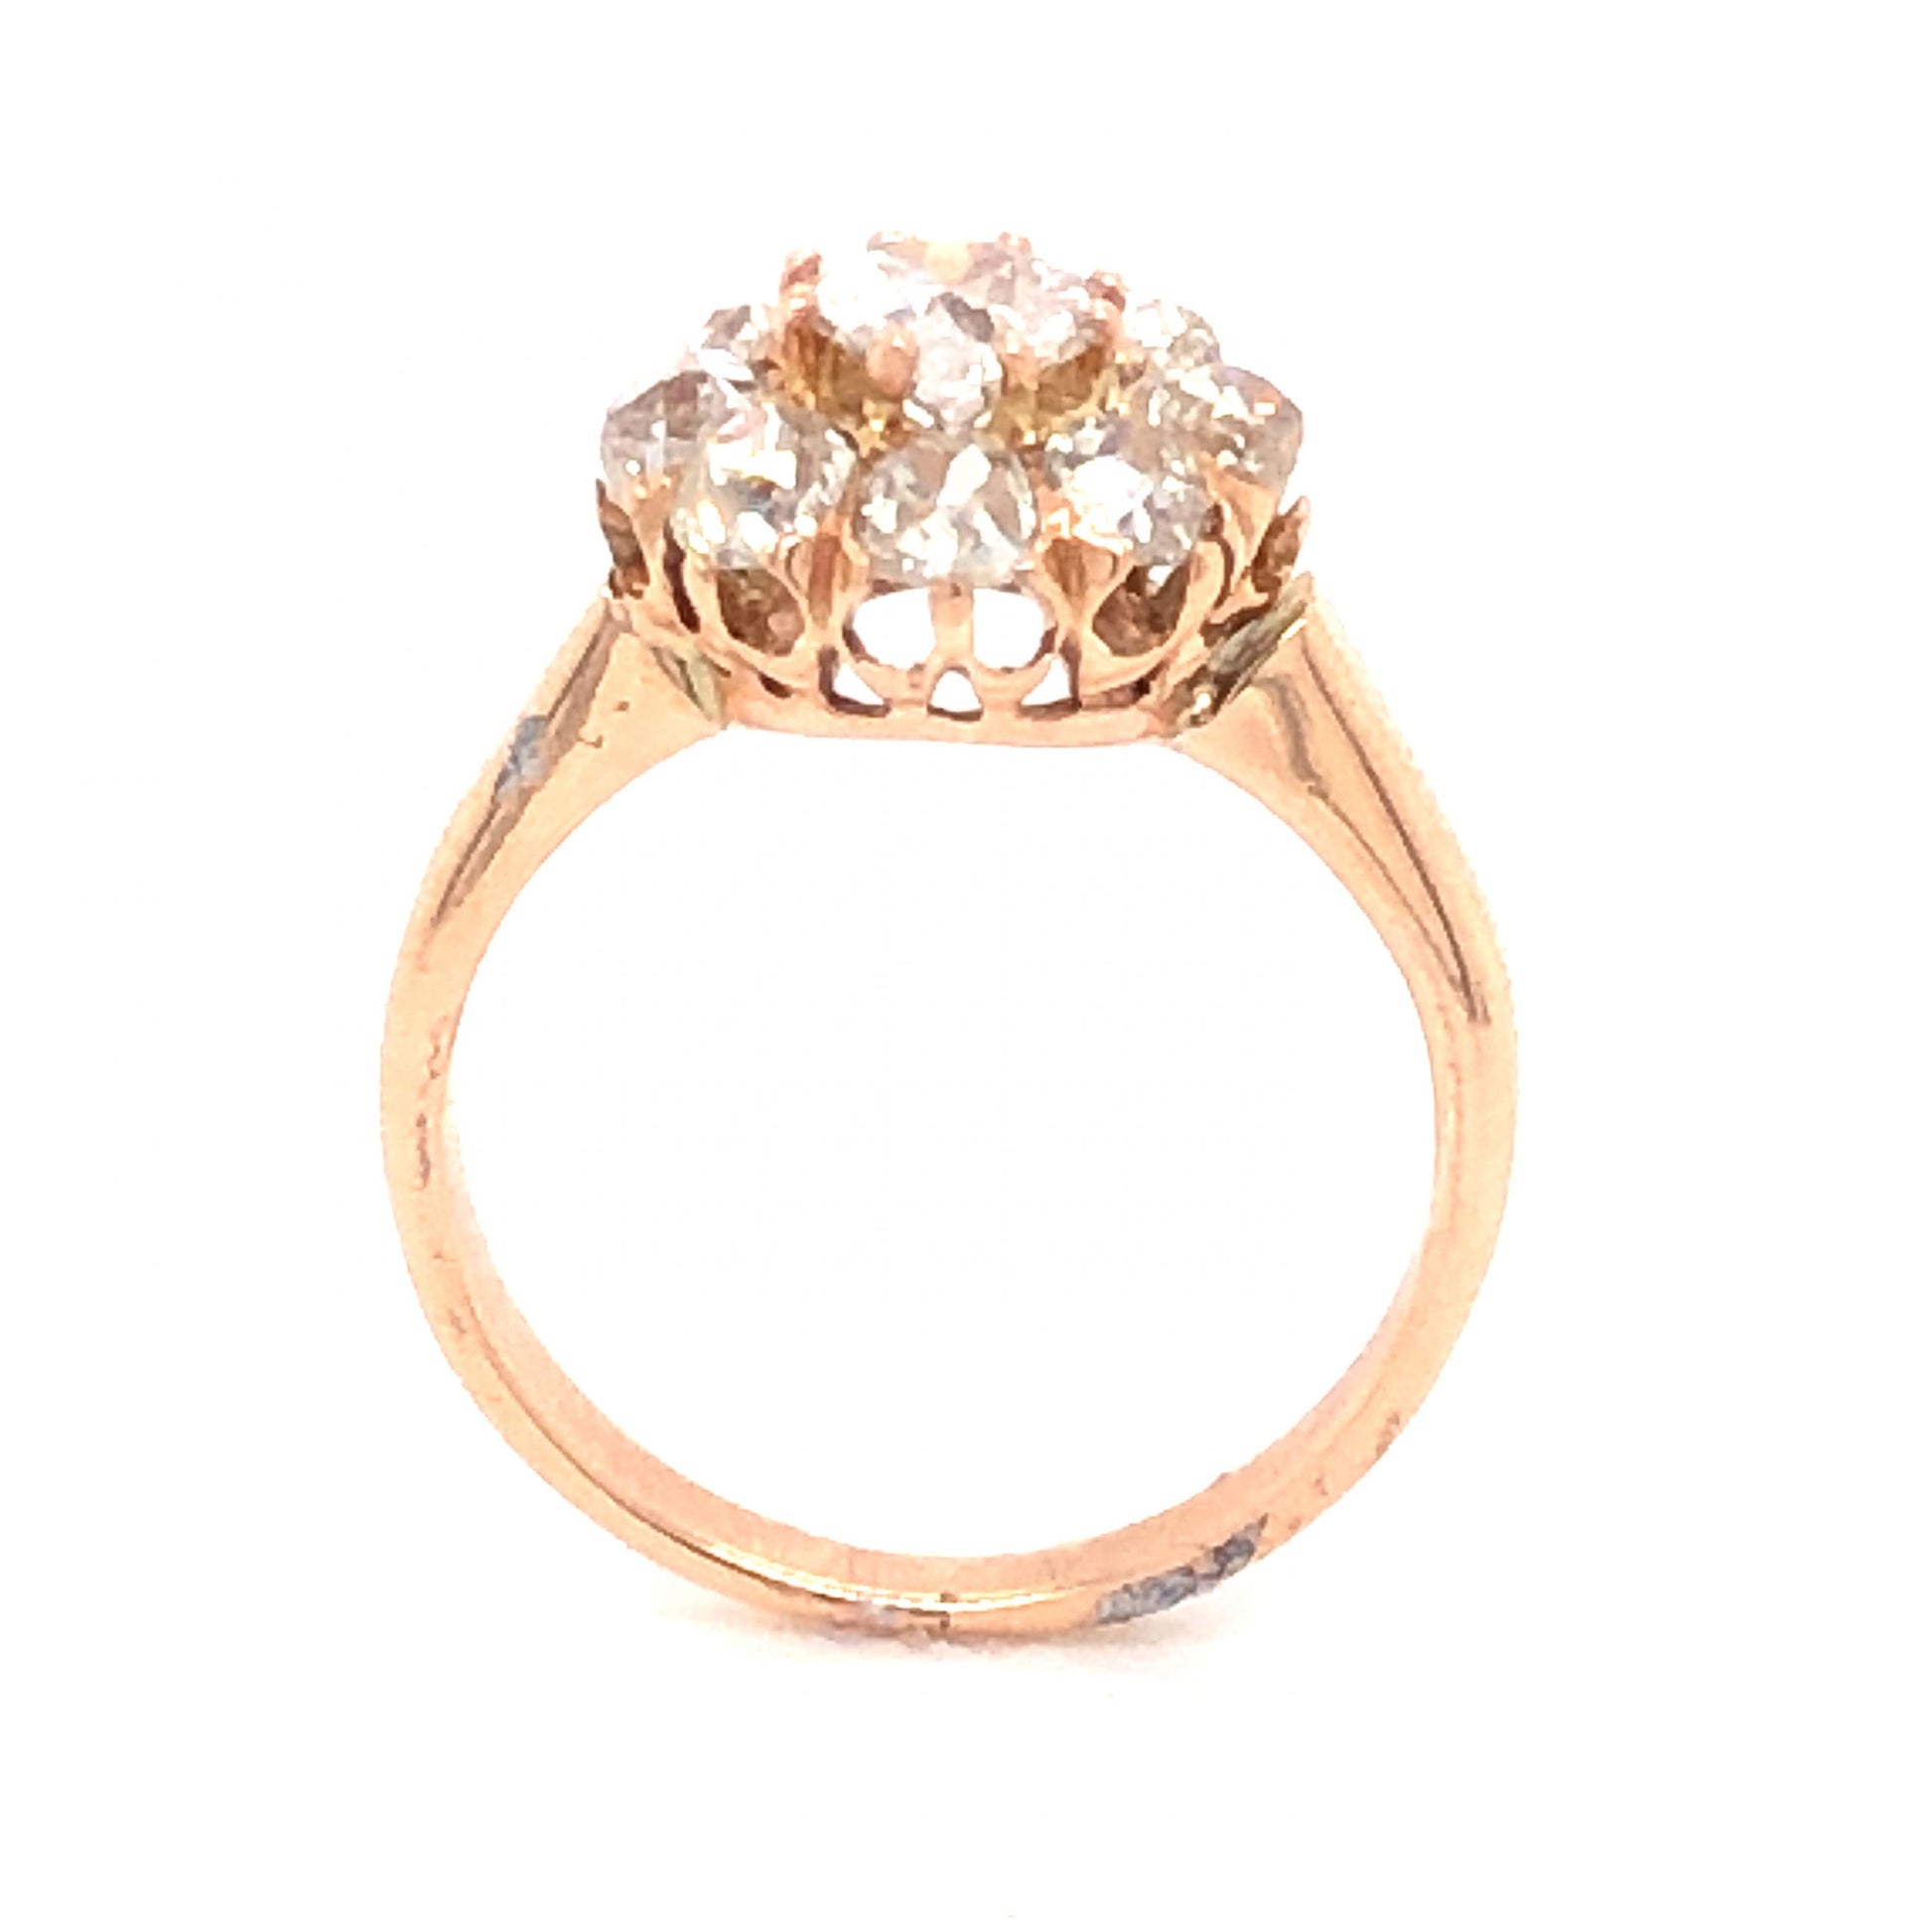 .40 Victorian Diamond Cluster Engagement Ring in 18K Rose Gold